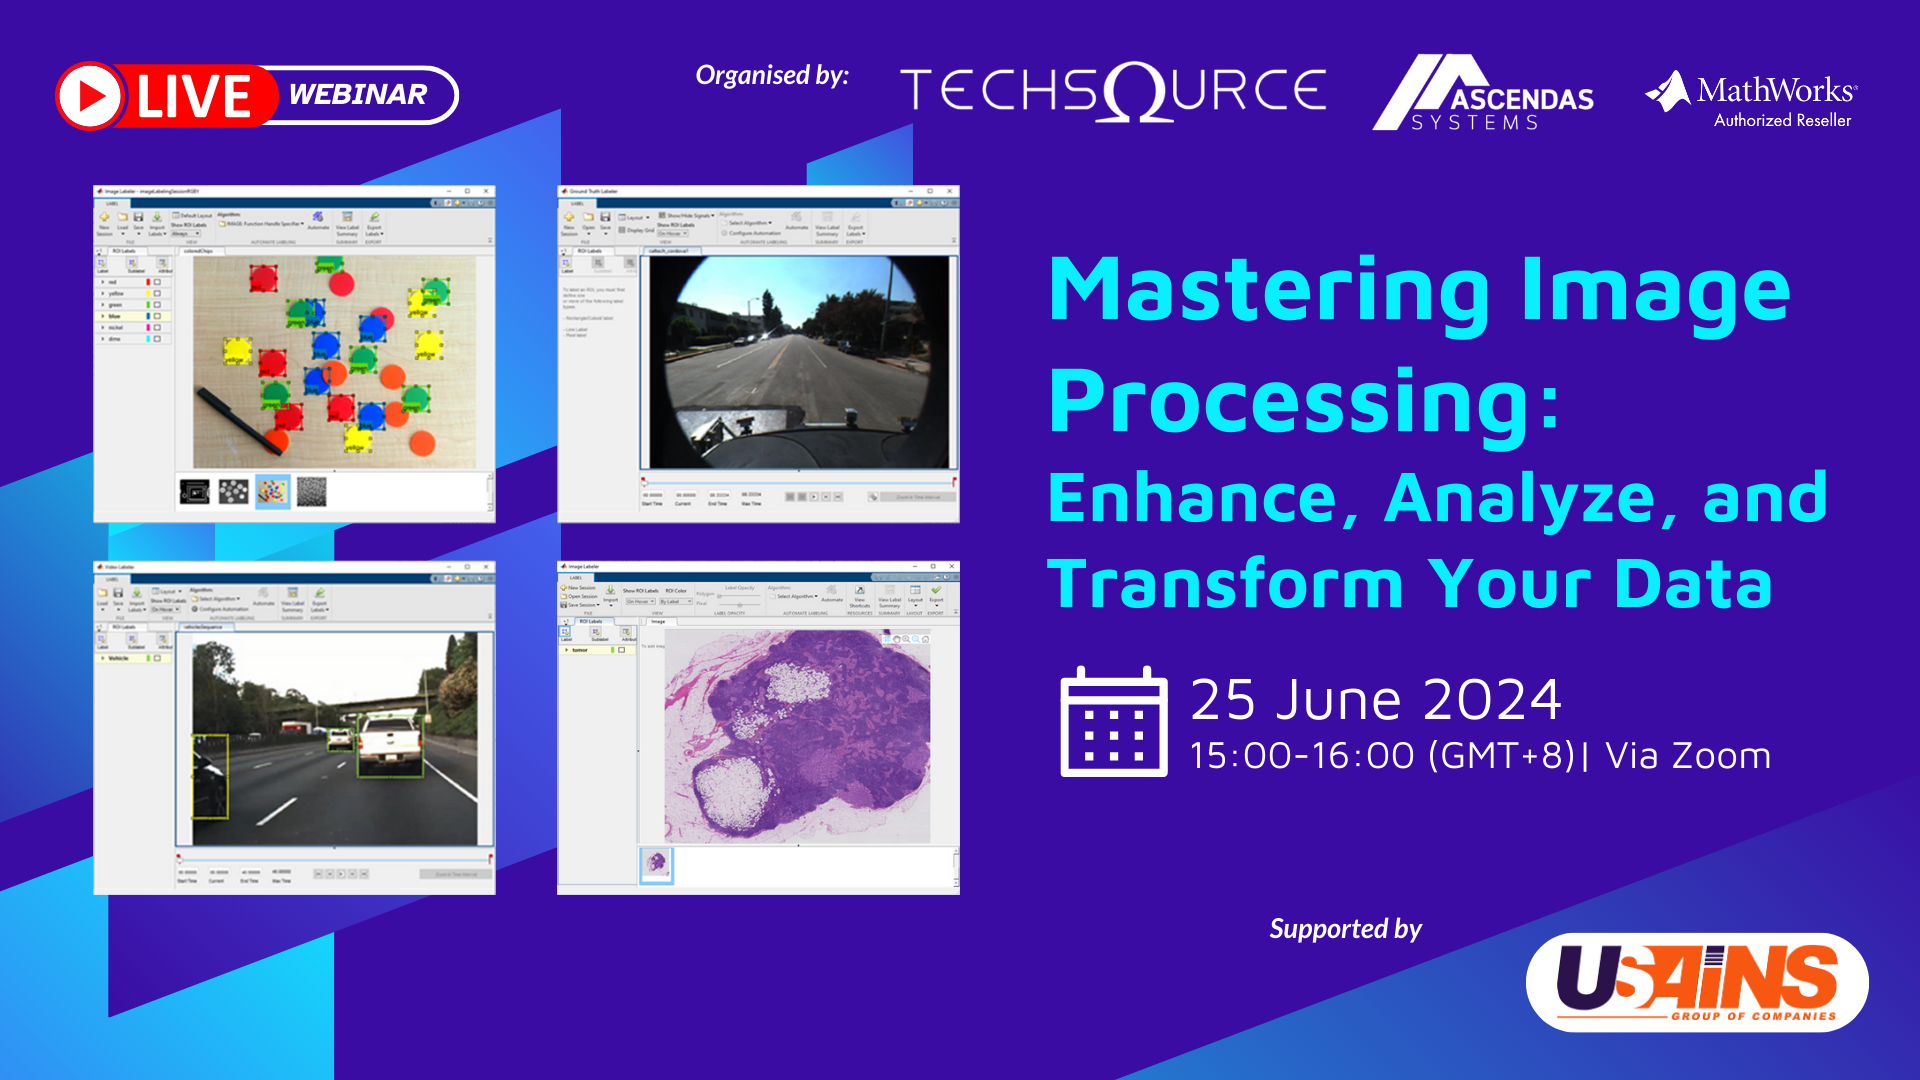 Mastering Image Processing: Enhance, Analyze and Transform Your Data